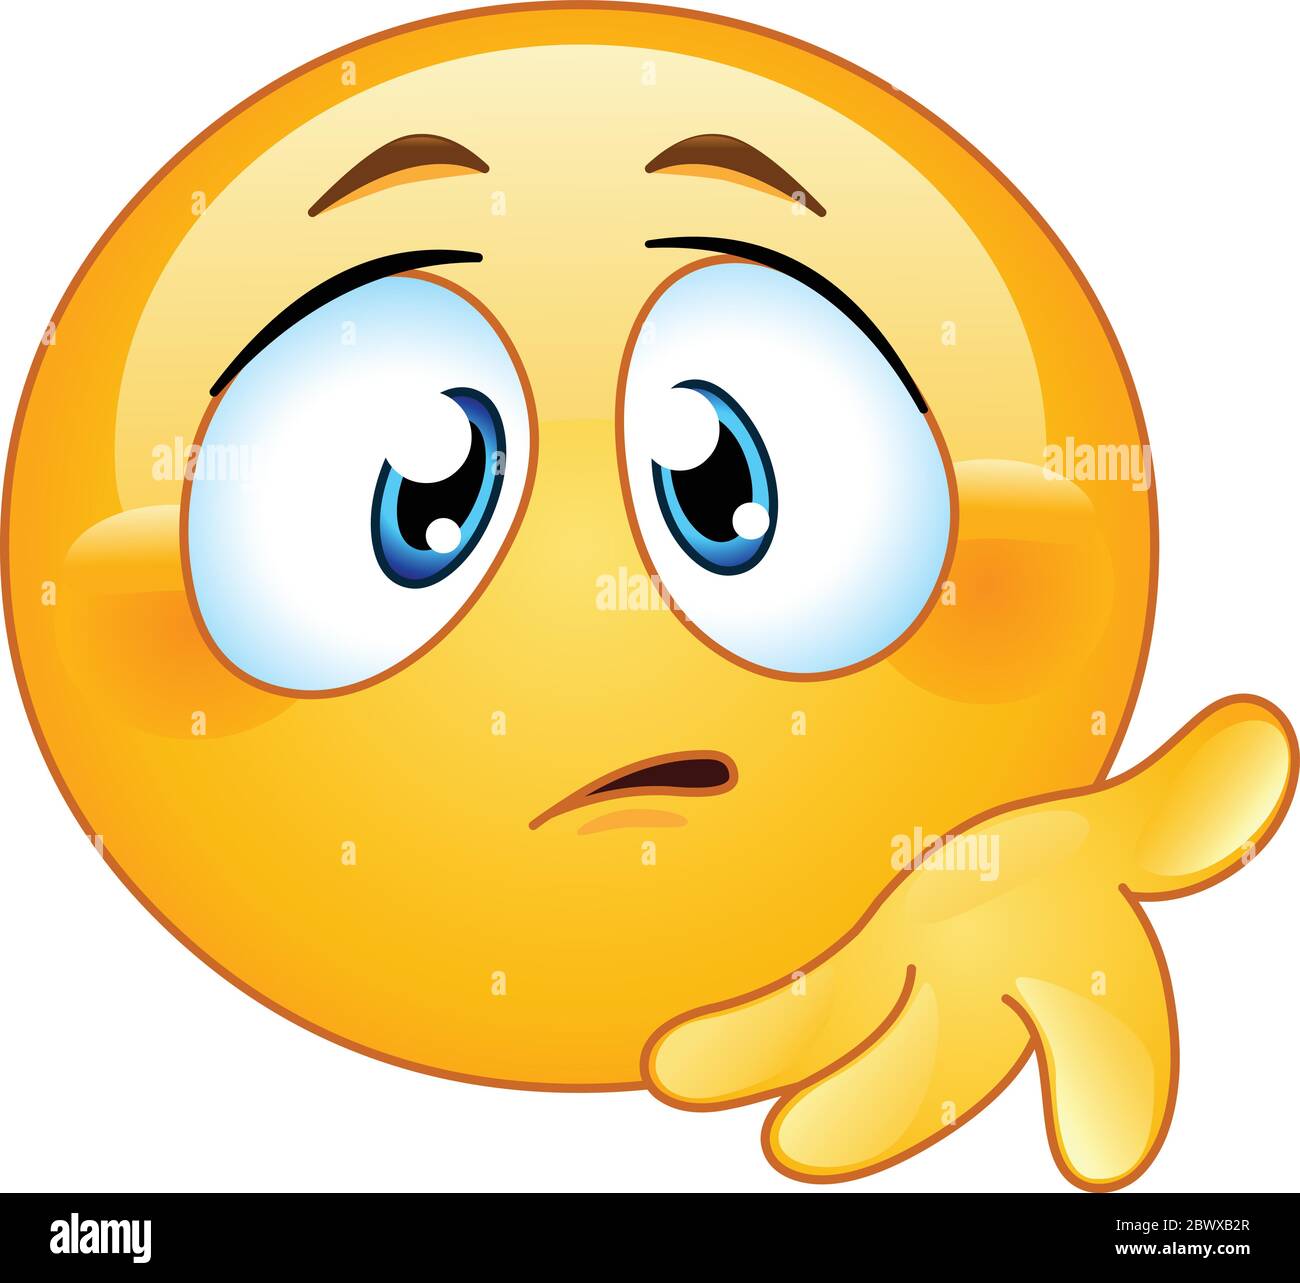 Confused emoji emoticon holds out his hand with his palm turned upwards and making a gesture of what is or did wrong, I didn’t get it, huh Stock Vector